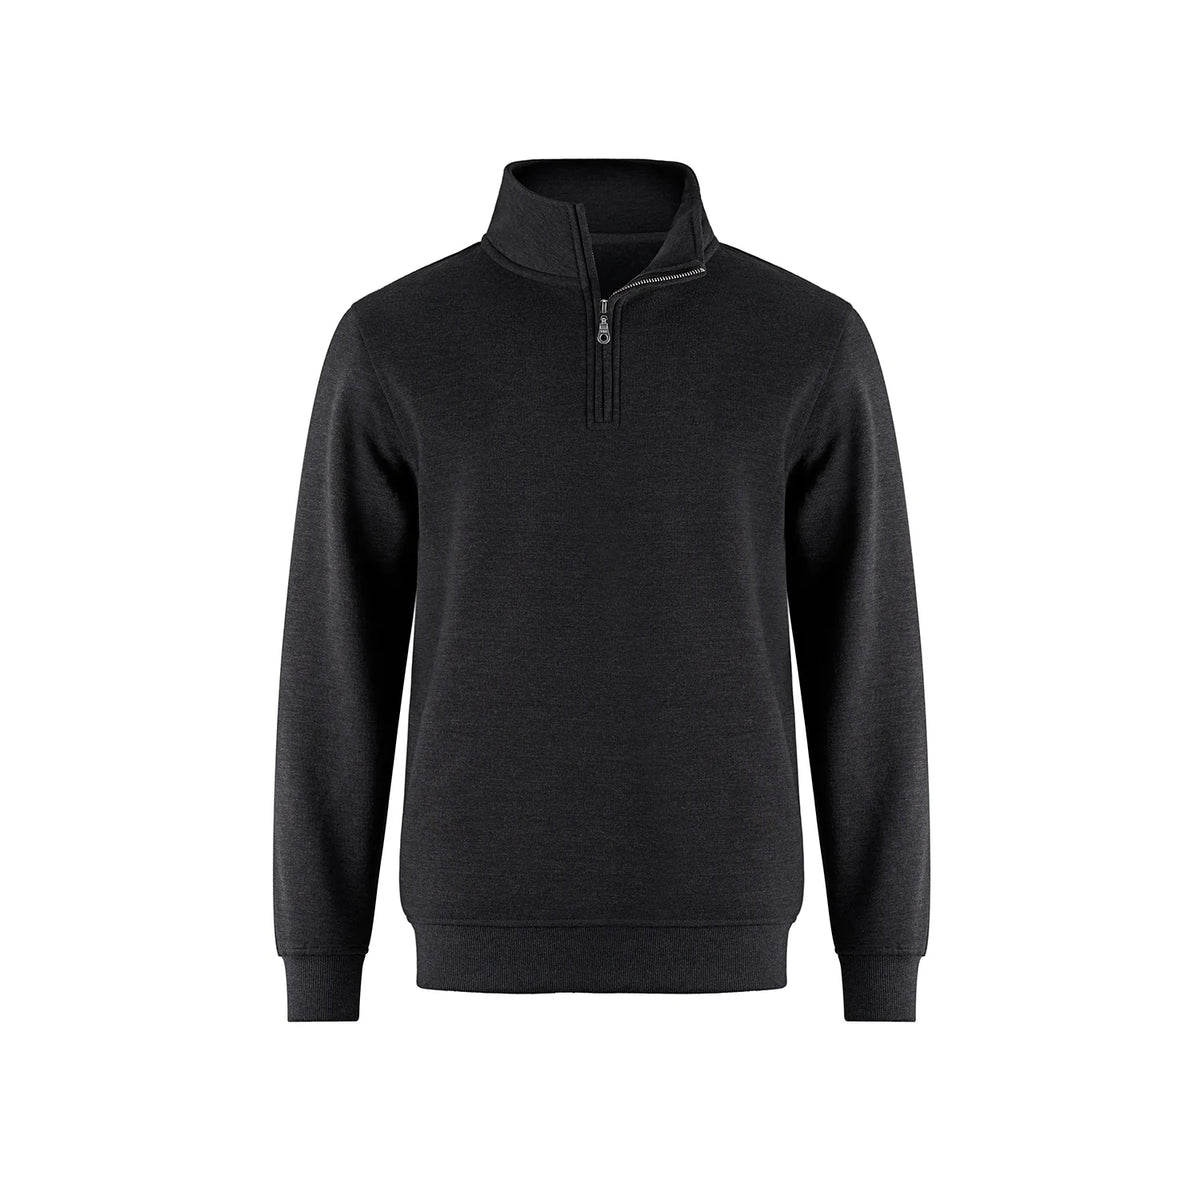 CSW 24/7 Adult 1/4 Zip Pullover - Uniquely Whynot Craft